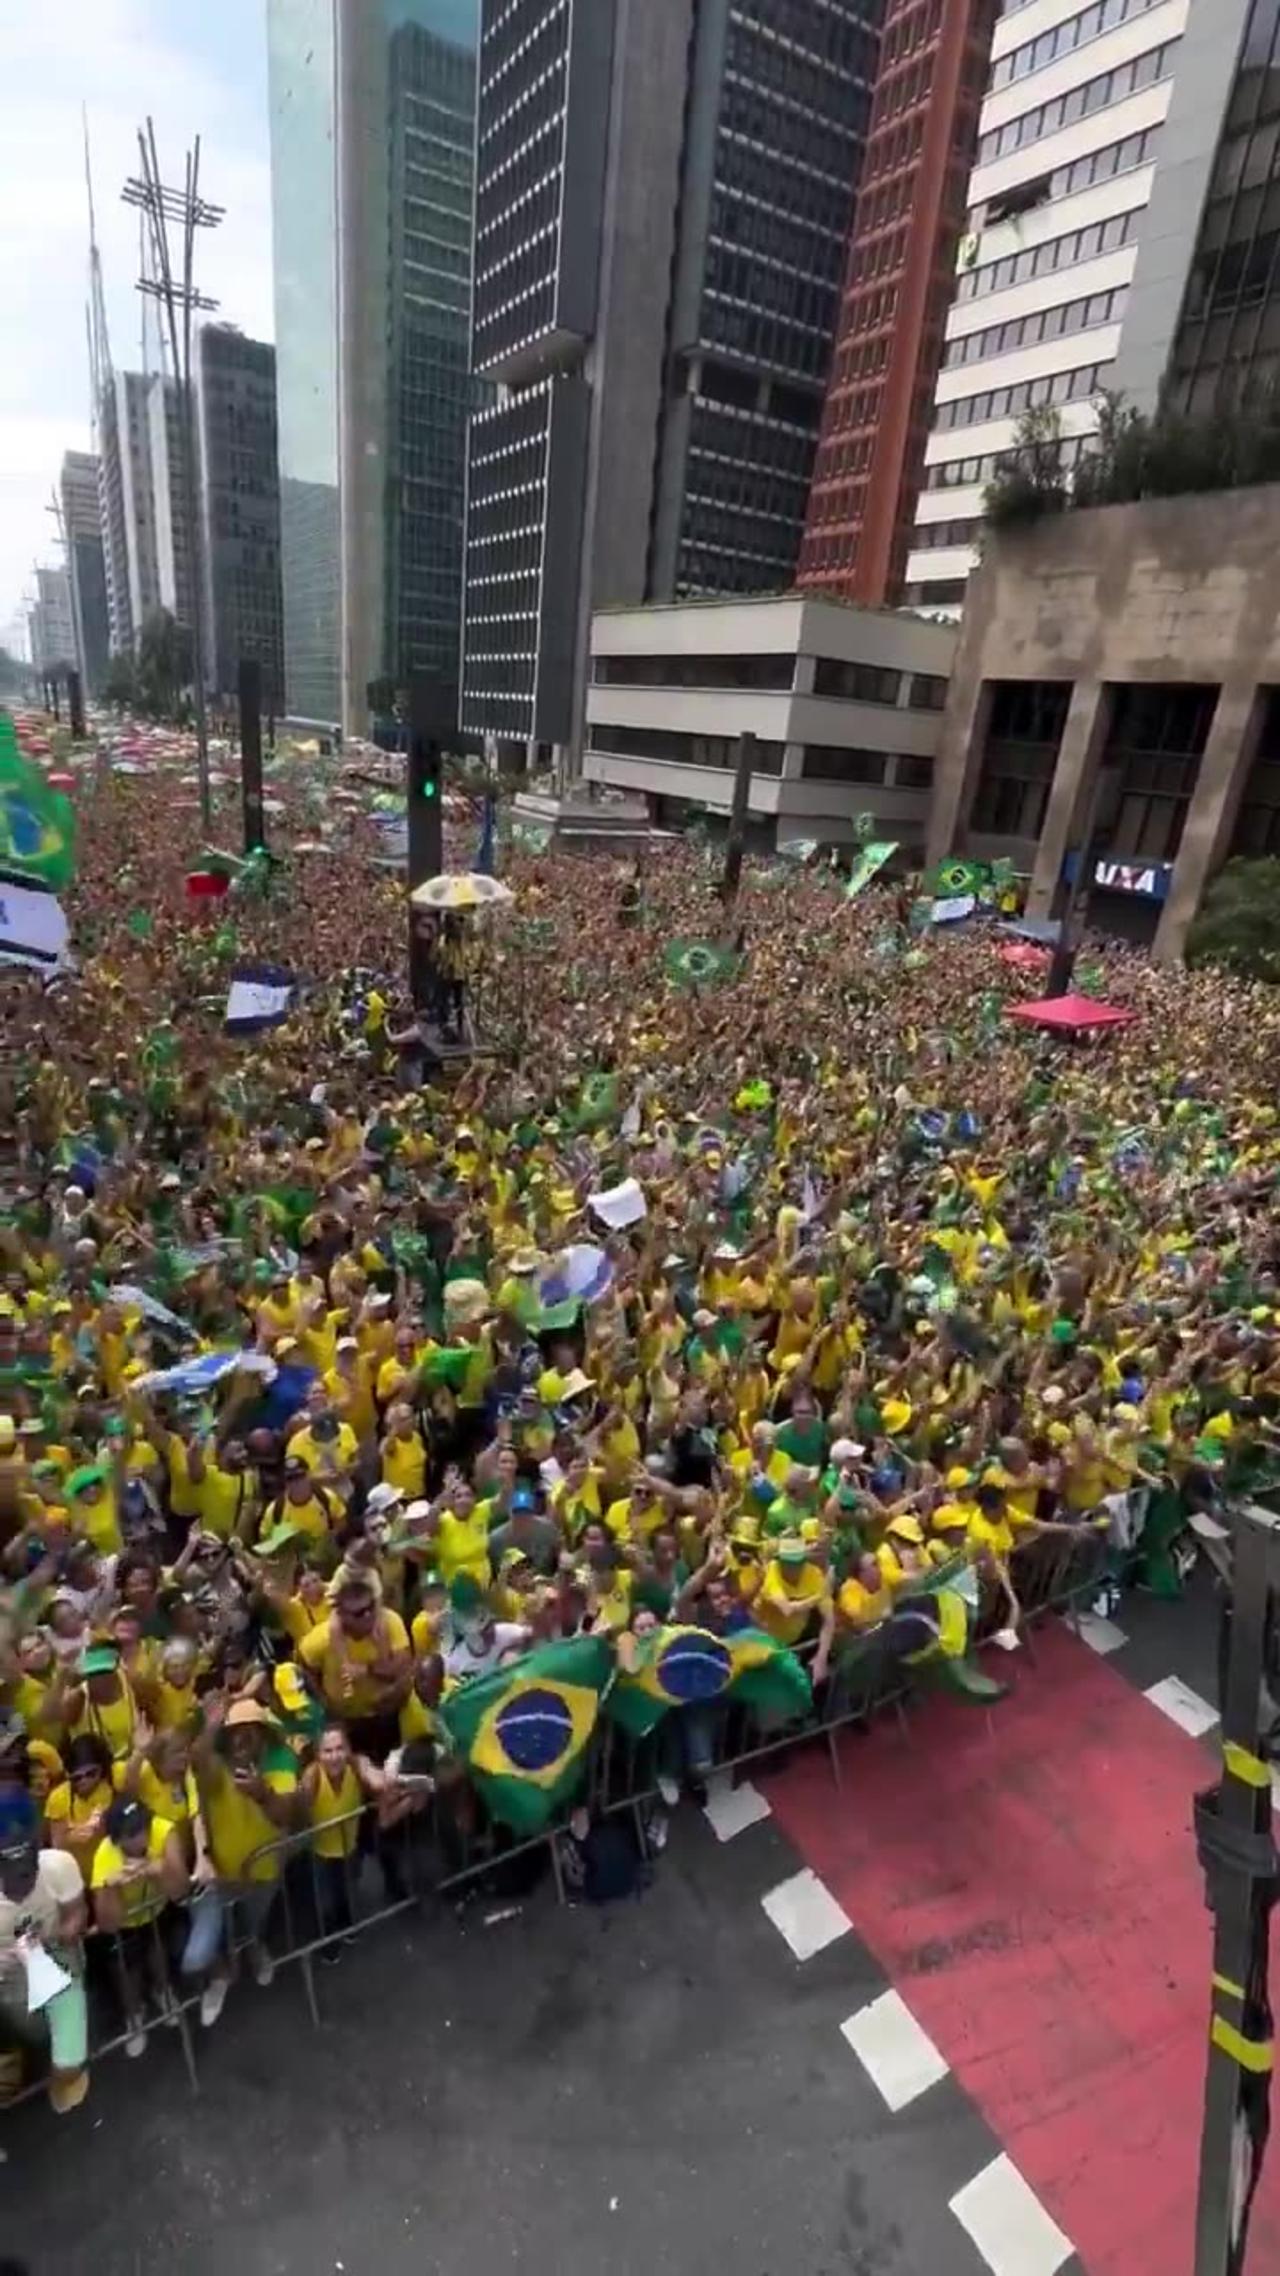 Wow one of the largest protests in Brazil’s recent history will start in 1h